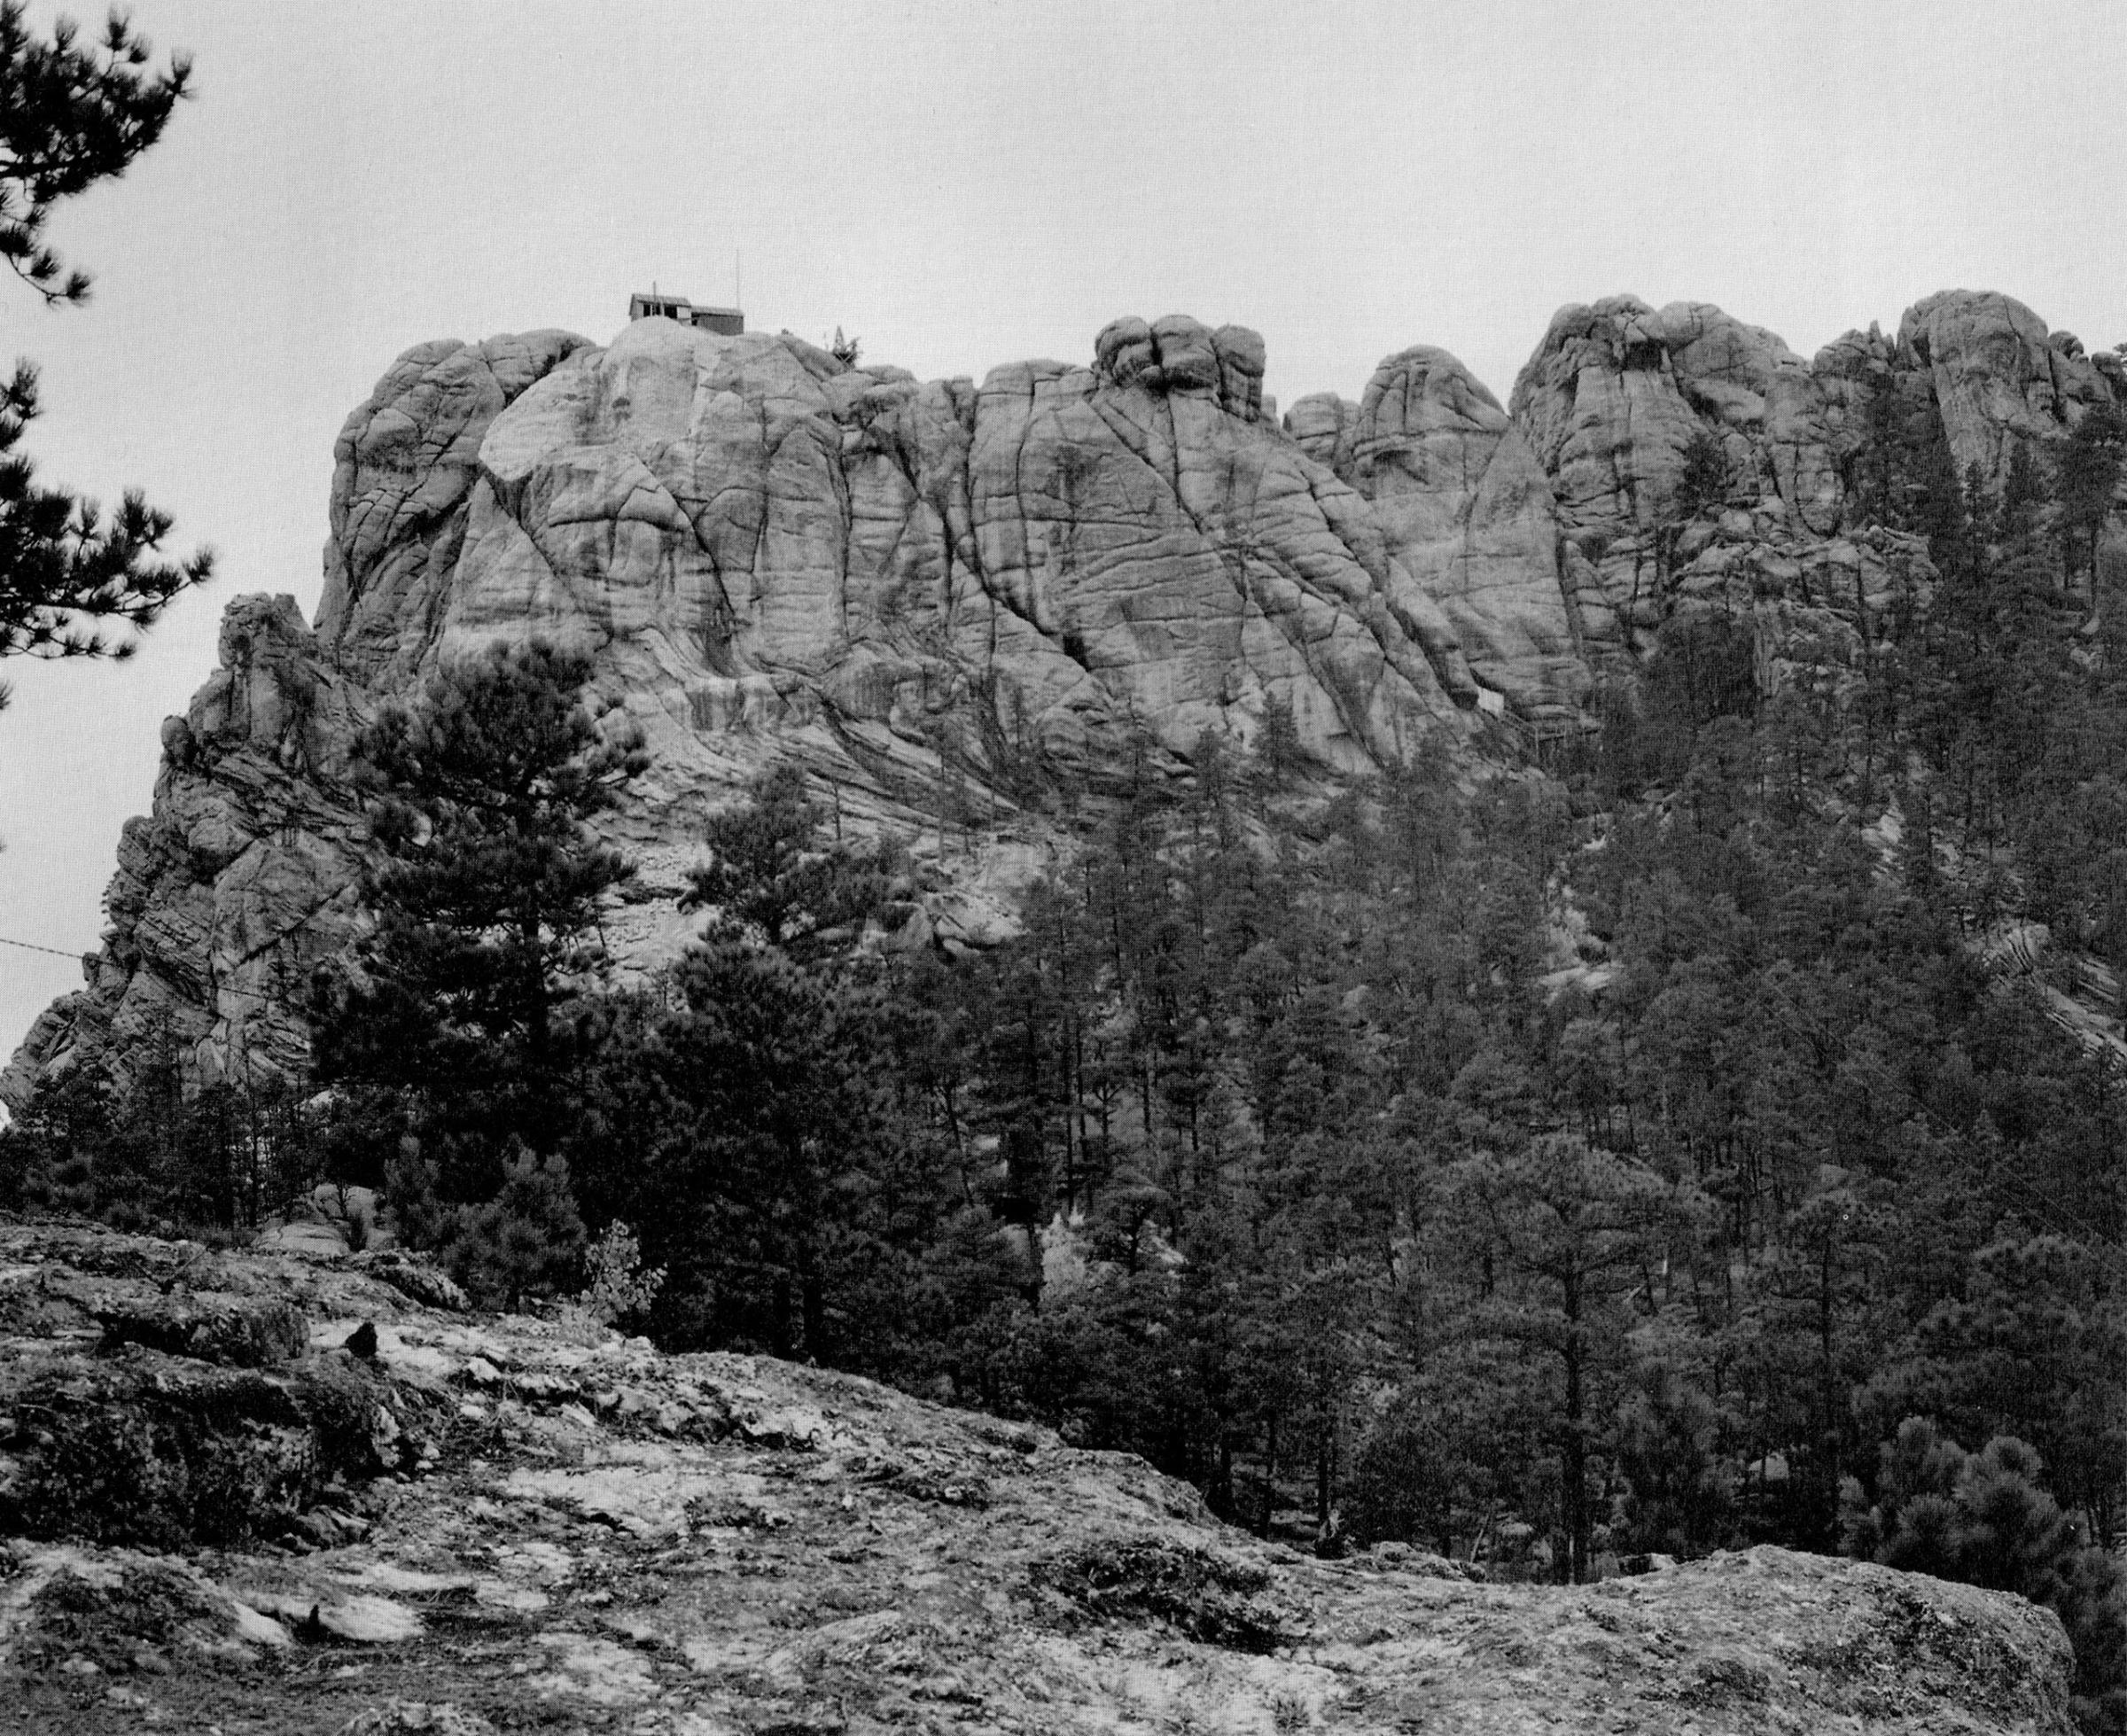 Mount Rushmore with the face of George Washington first beginning to appear, c. 1930s.